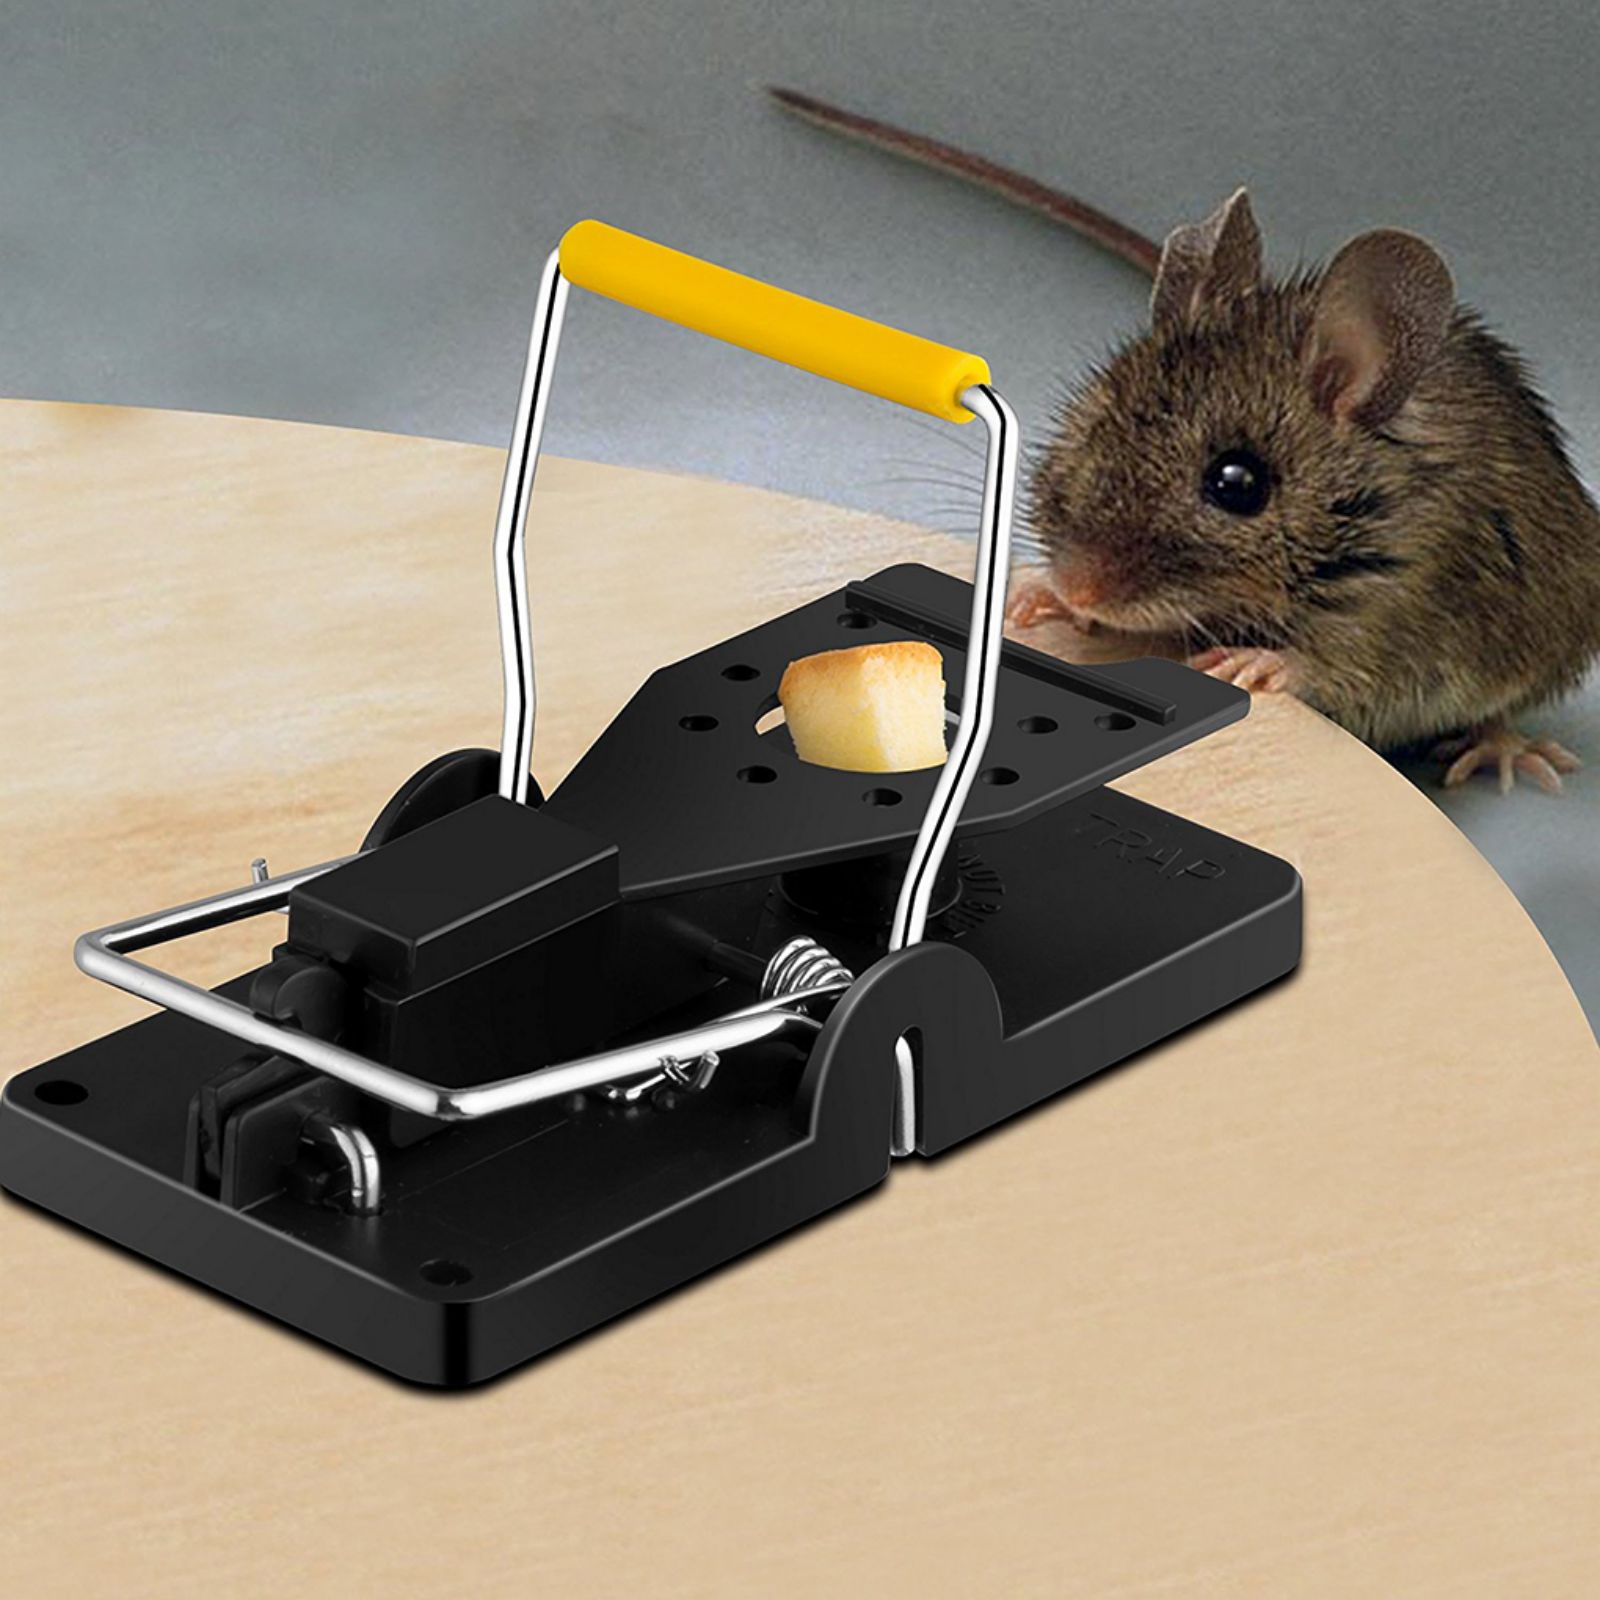 Mouse Trap, Easy To Bait Rodent Killer, Reusable Snap Mice Trap